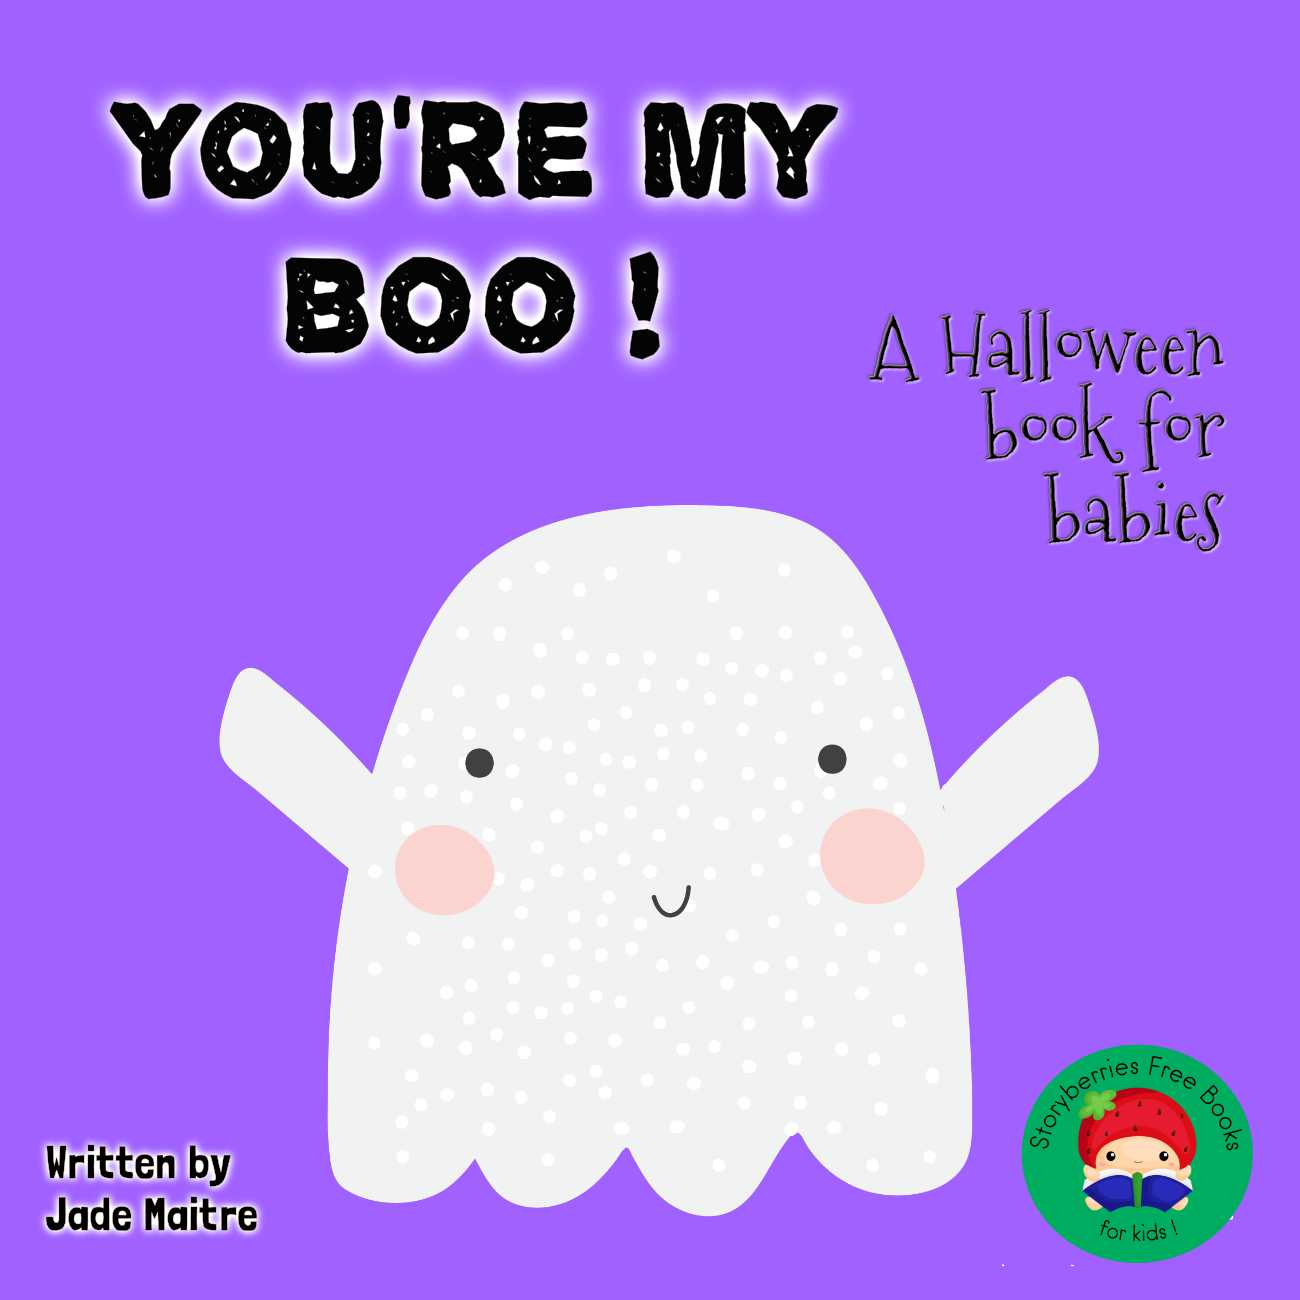 Bedtime stories You're My Boo by Jade Maitre Halloween stories for kids cover